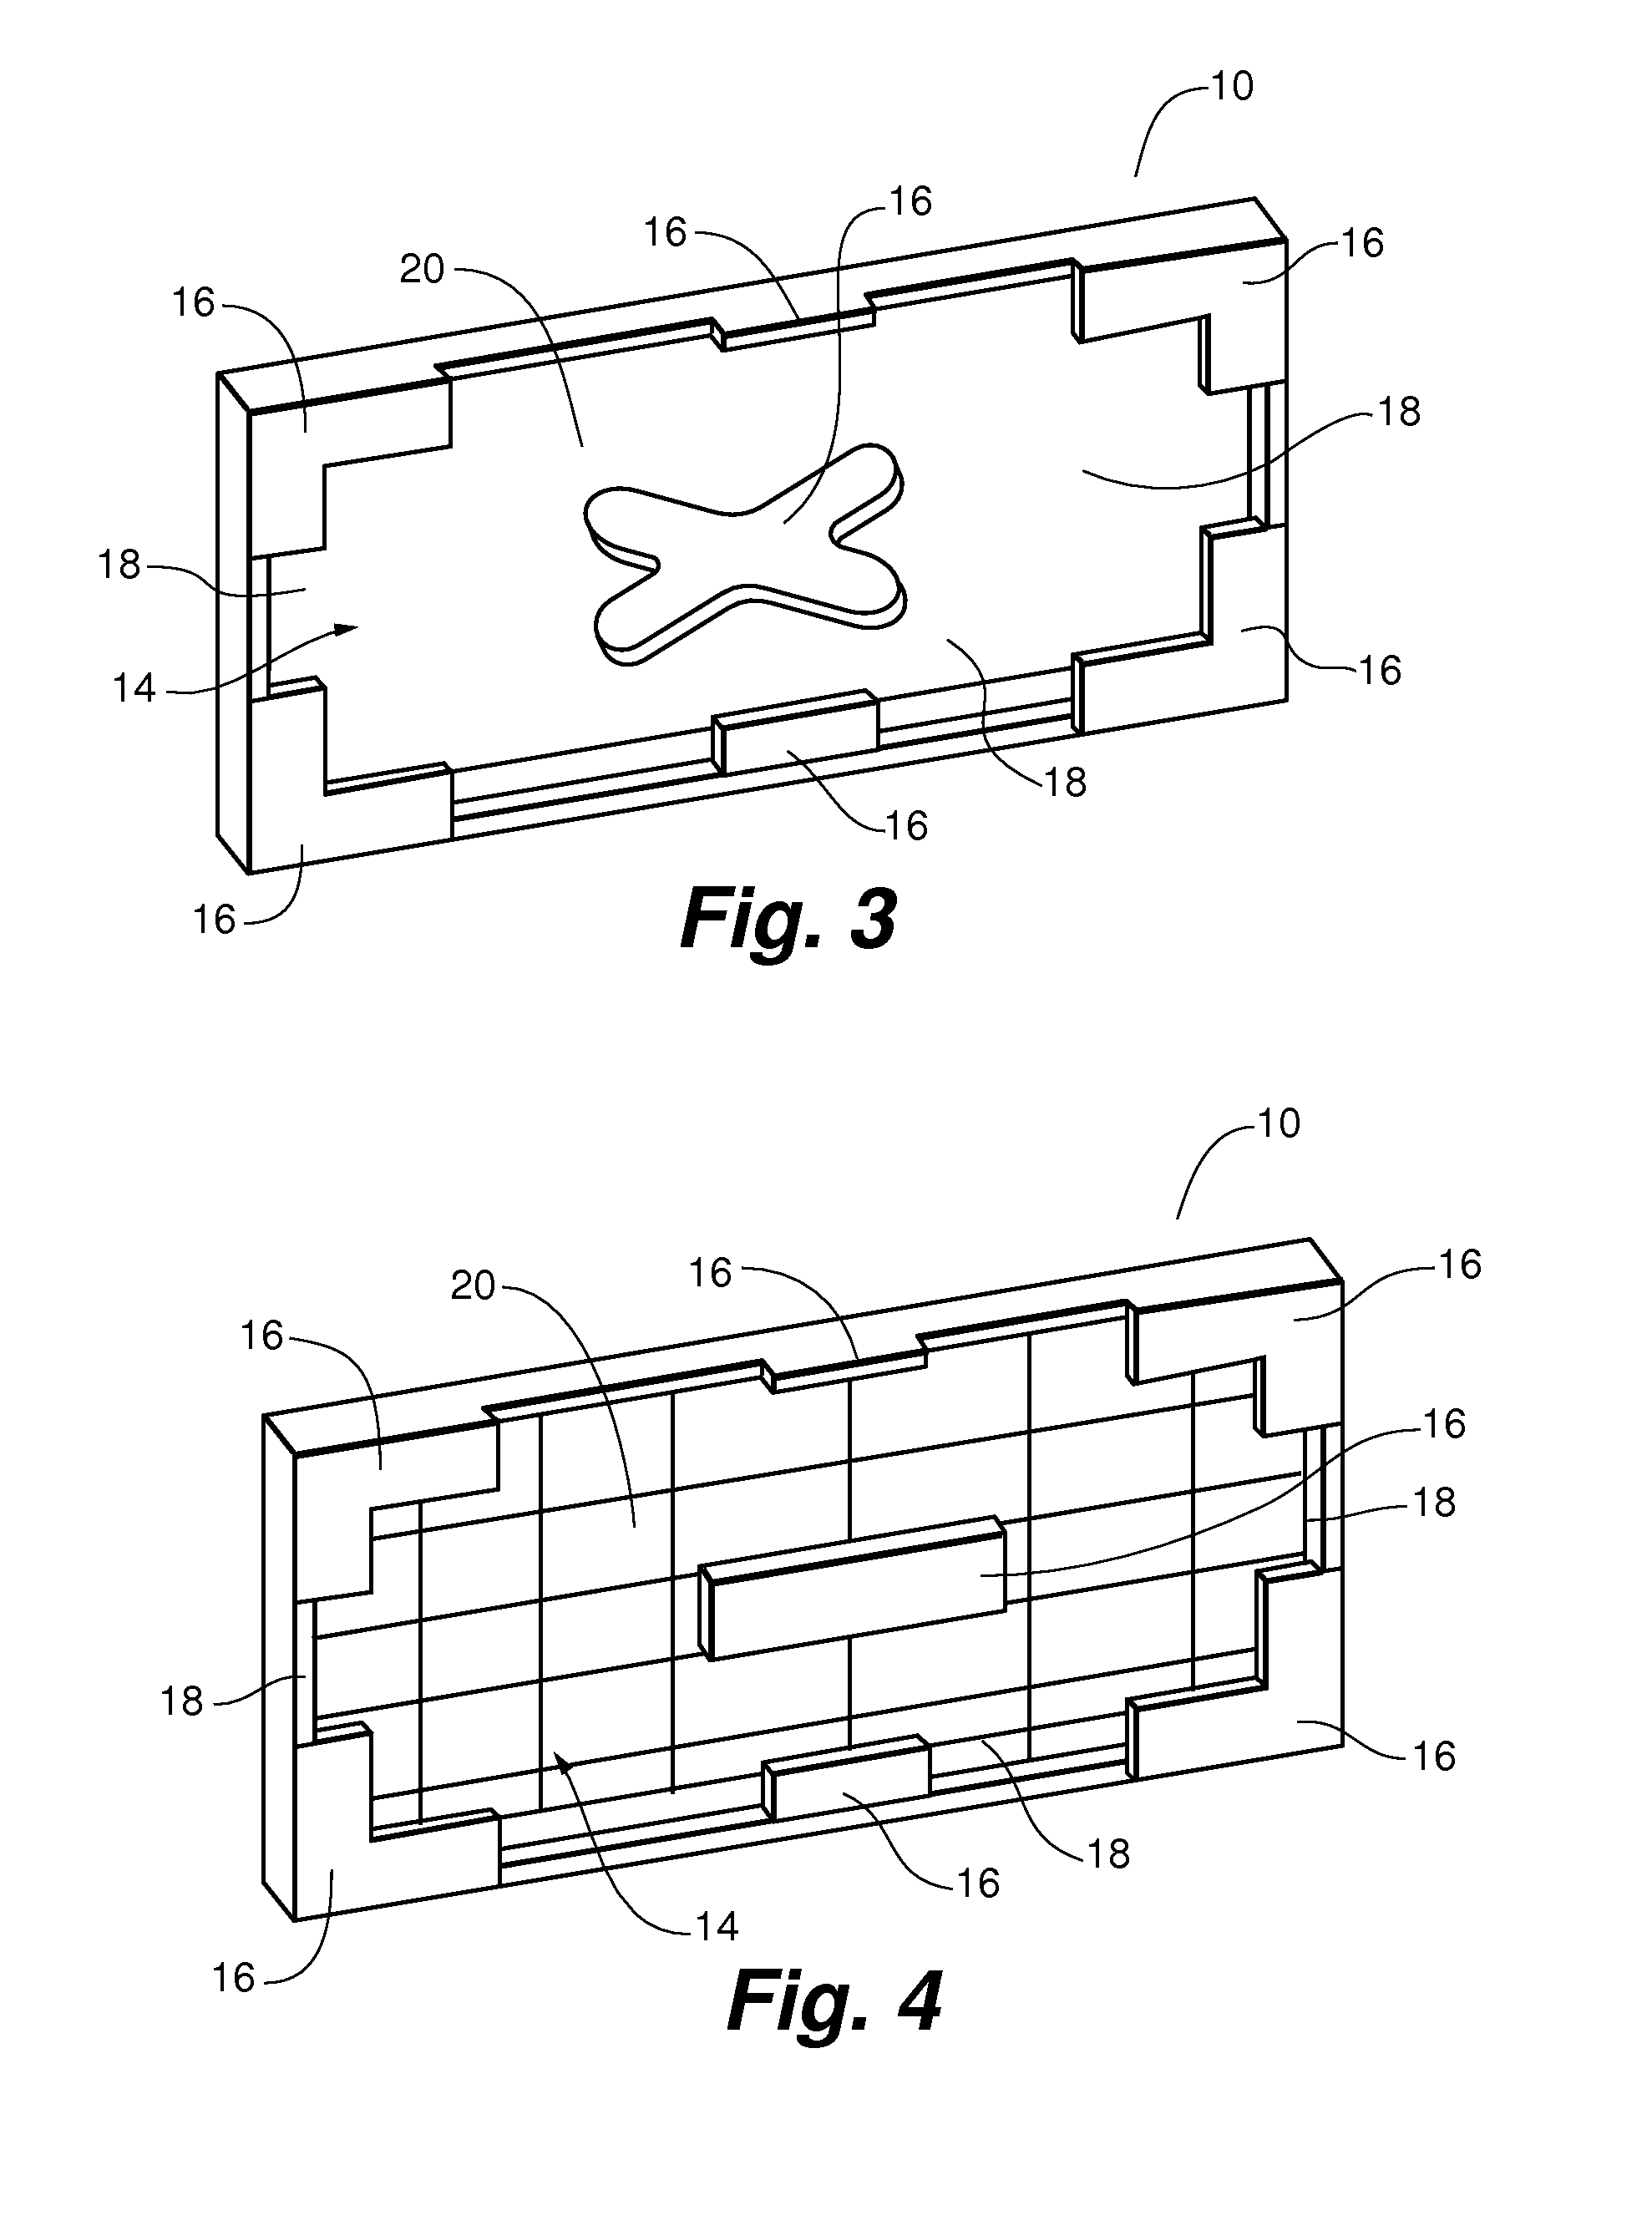 Polymeric or composite wall and surface veneering products, systems and methods of use thereof